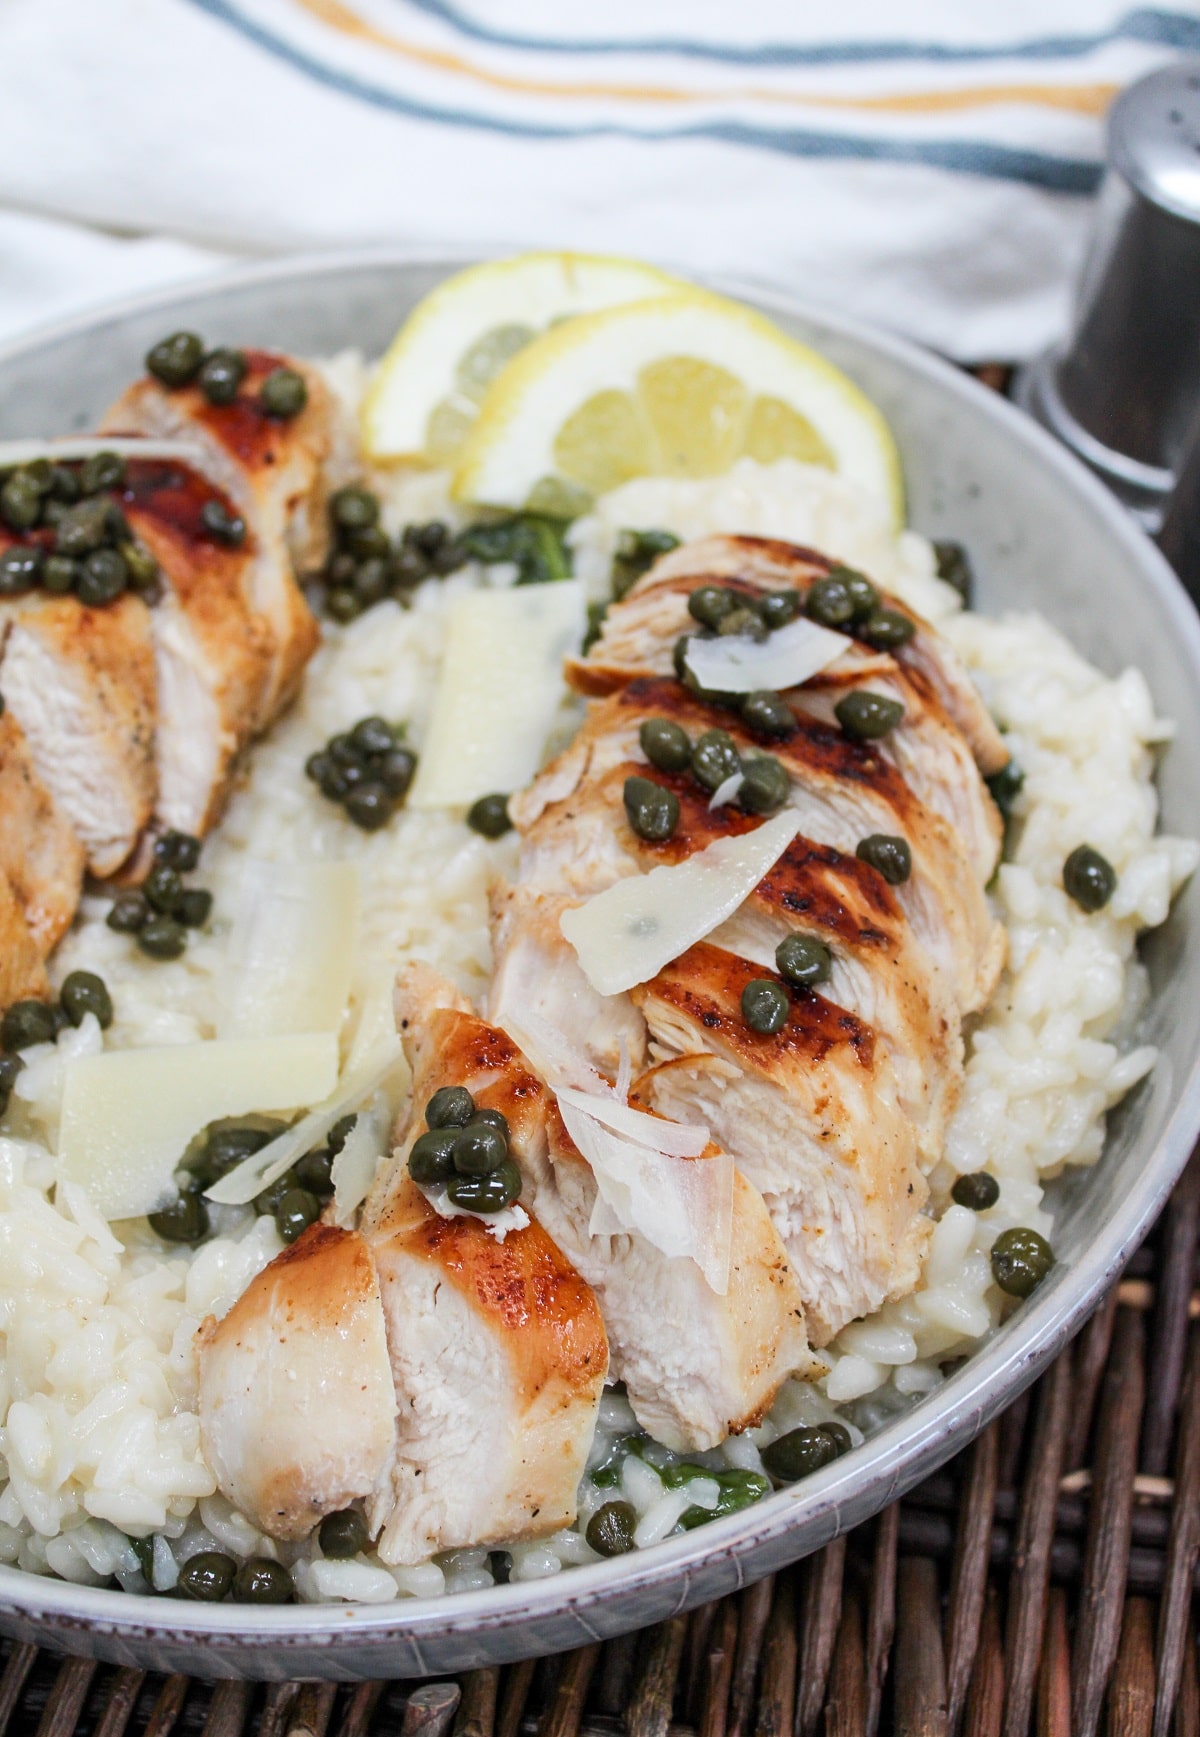 sliced chicken over risotto